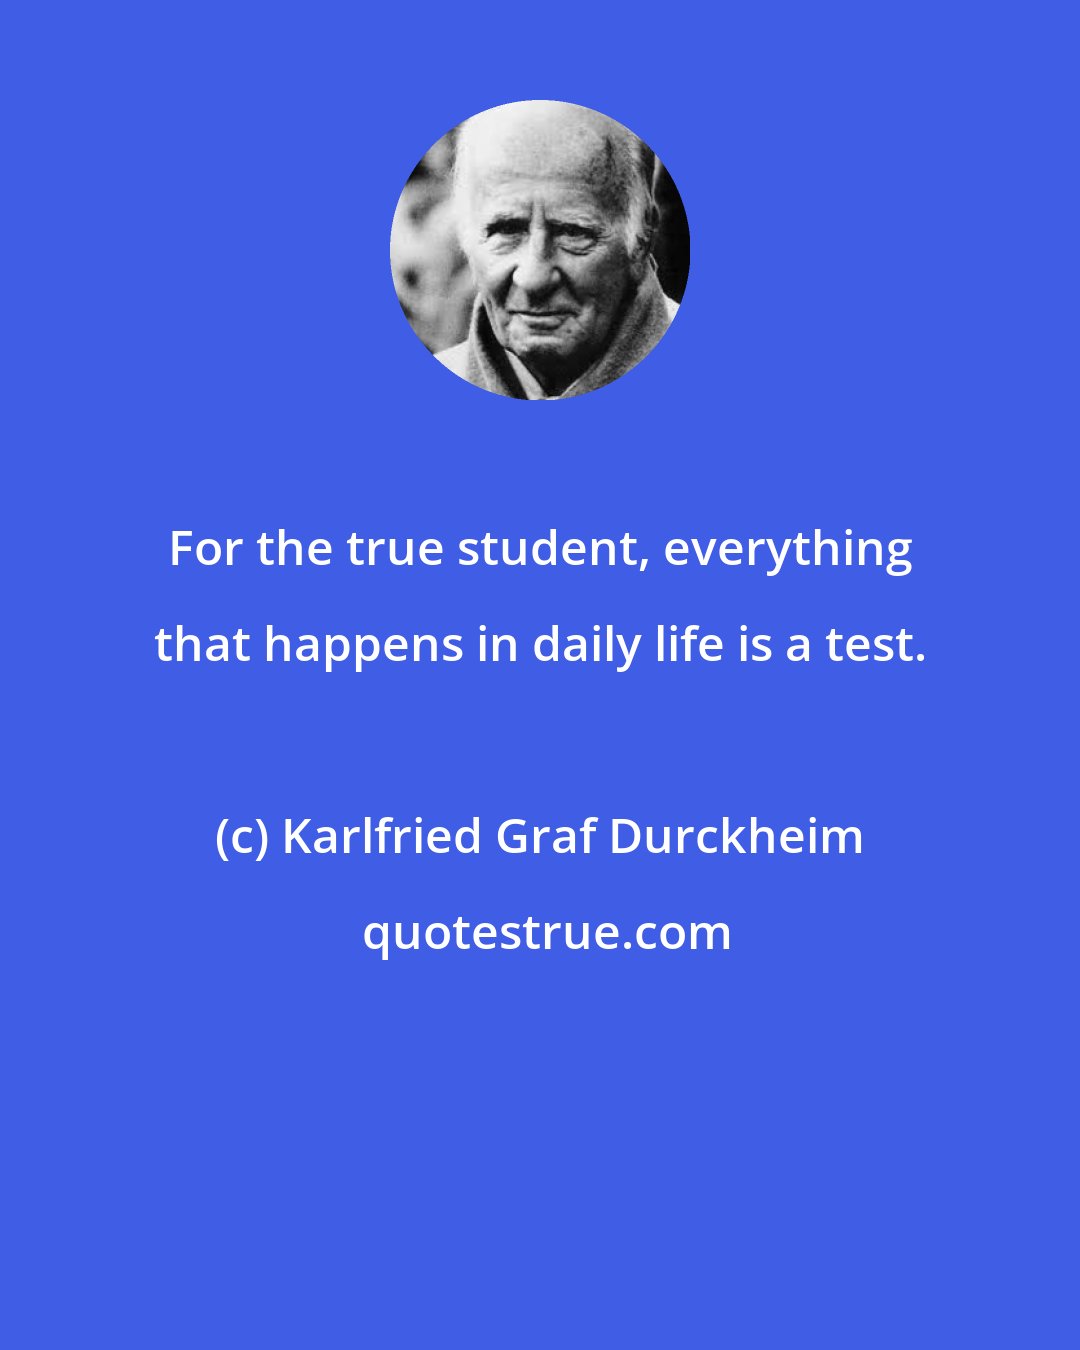 Karlfried Graf Durckheim: For the true student, everything that happens in daily life is a test.